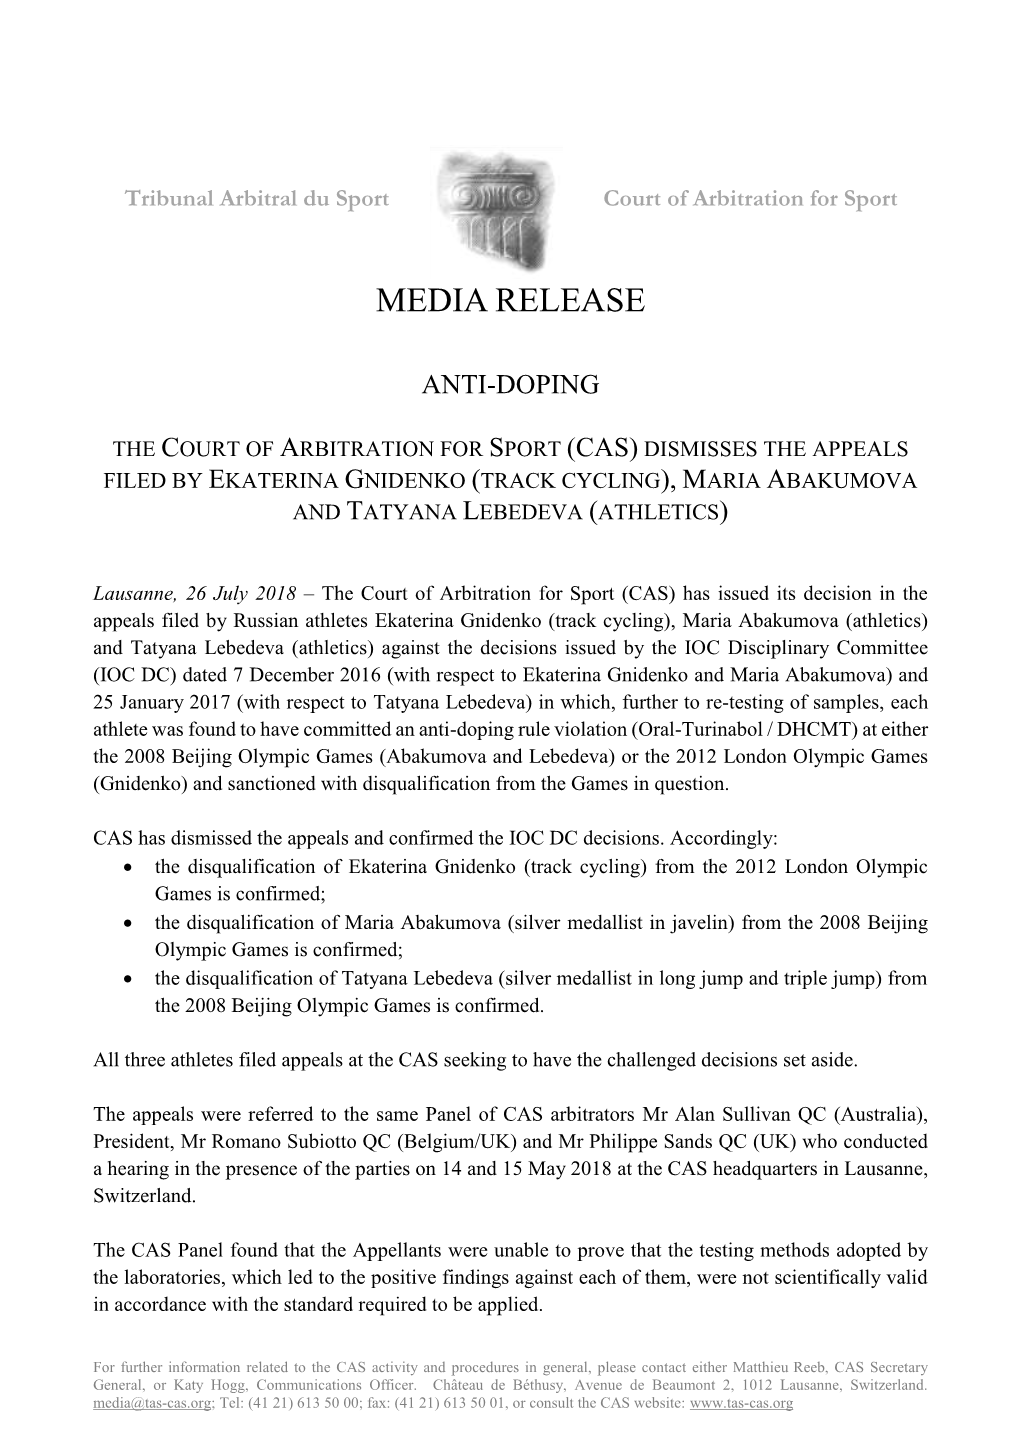 CAS Dismisses the Appeals Filed by Ekaterina Gnidenko, Maria